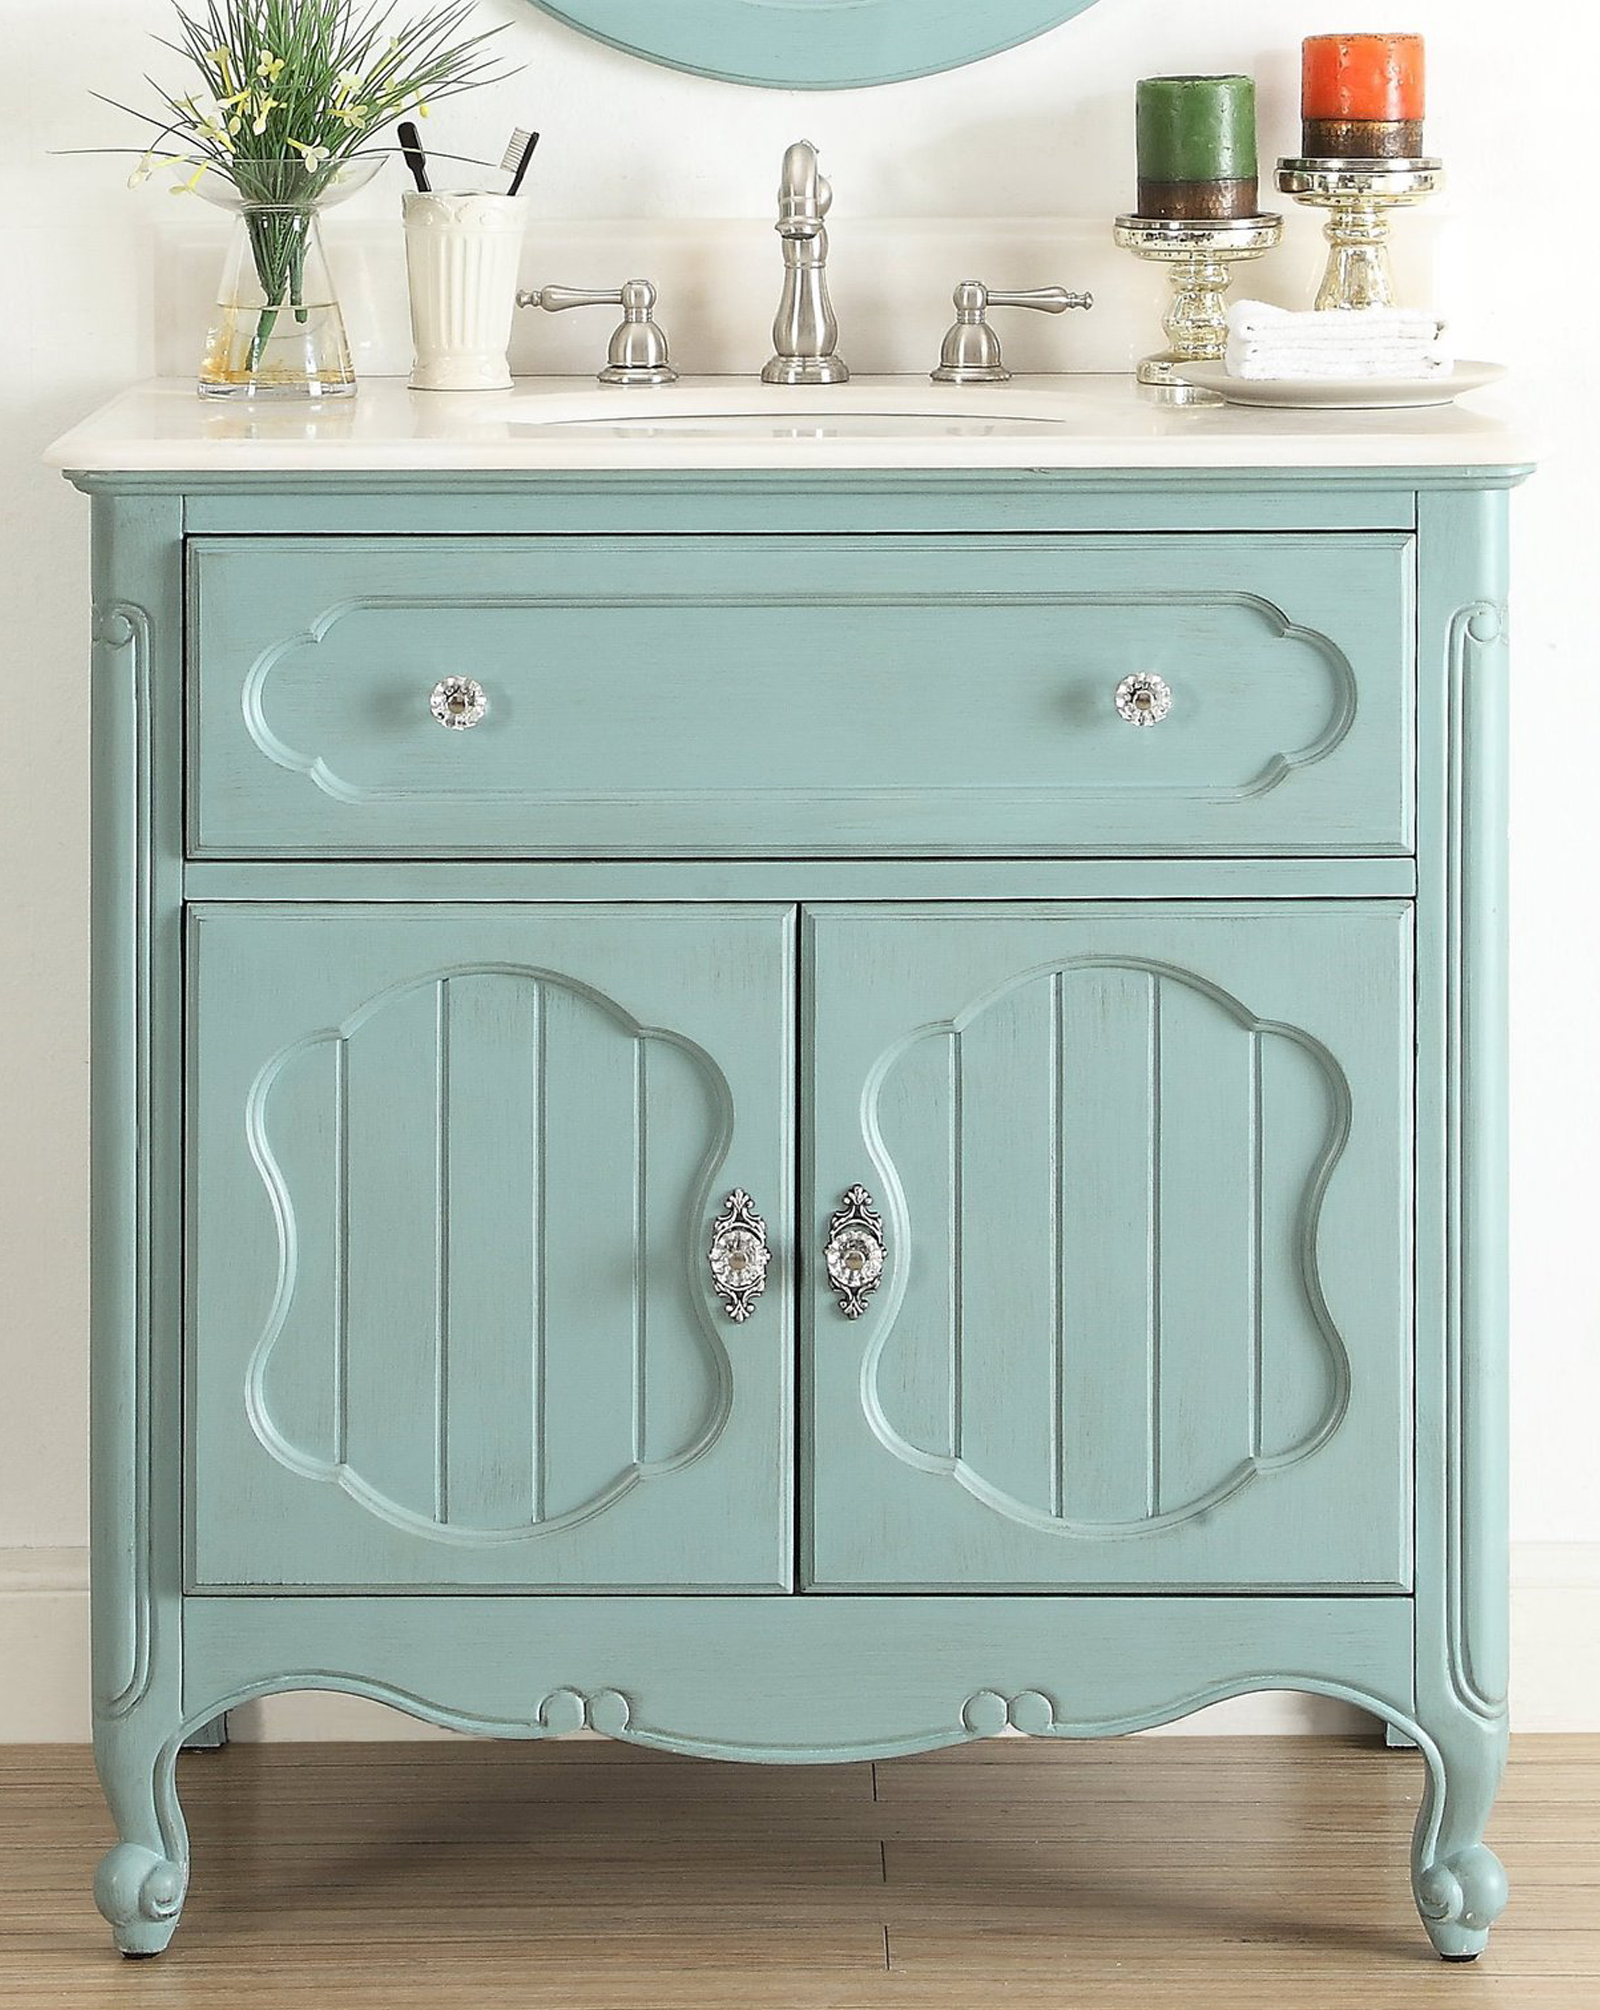 34” Single Sink Victorian Cottage Style Bathroom Vanity Vintage Blue Finish with White Marble Counter Top